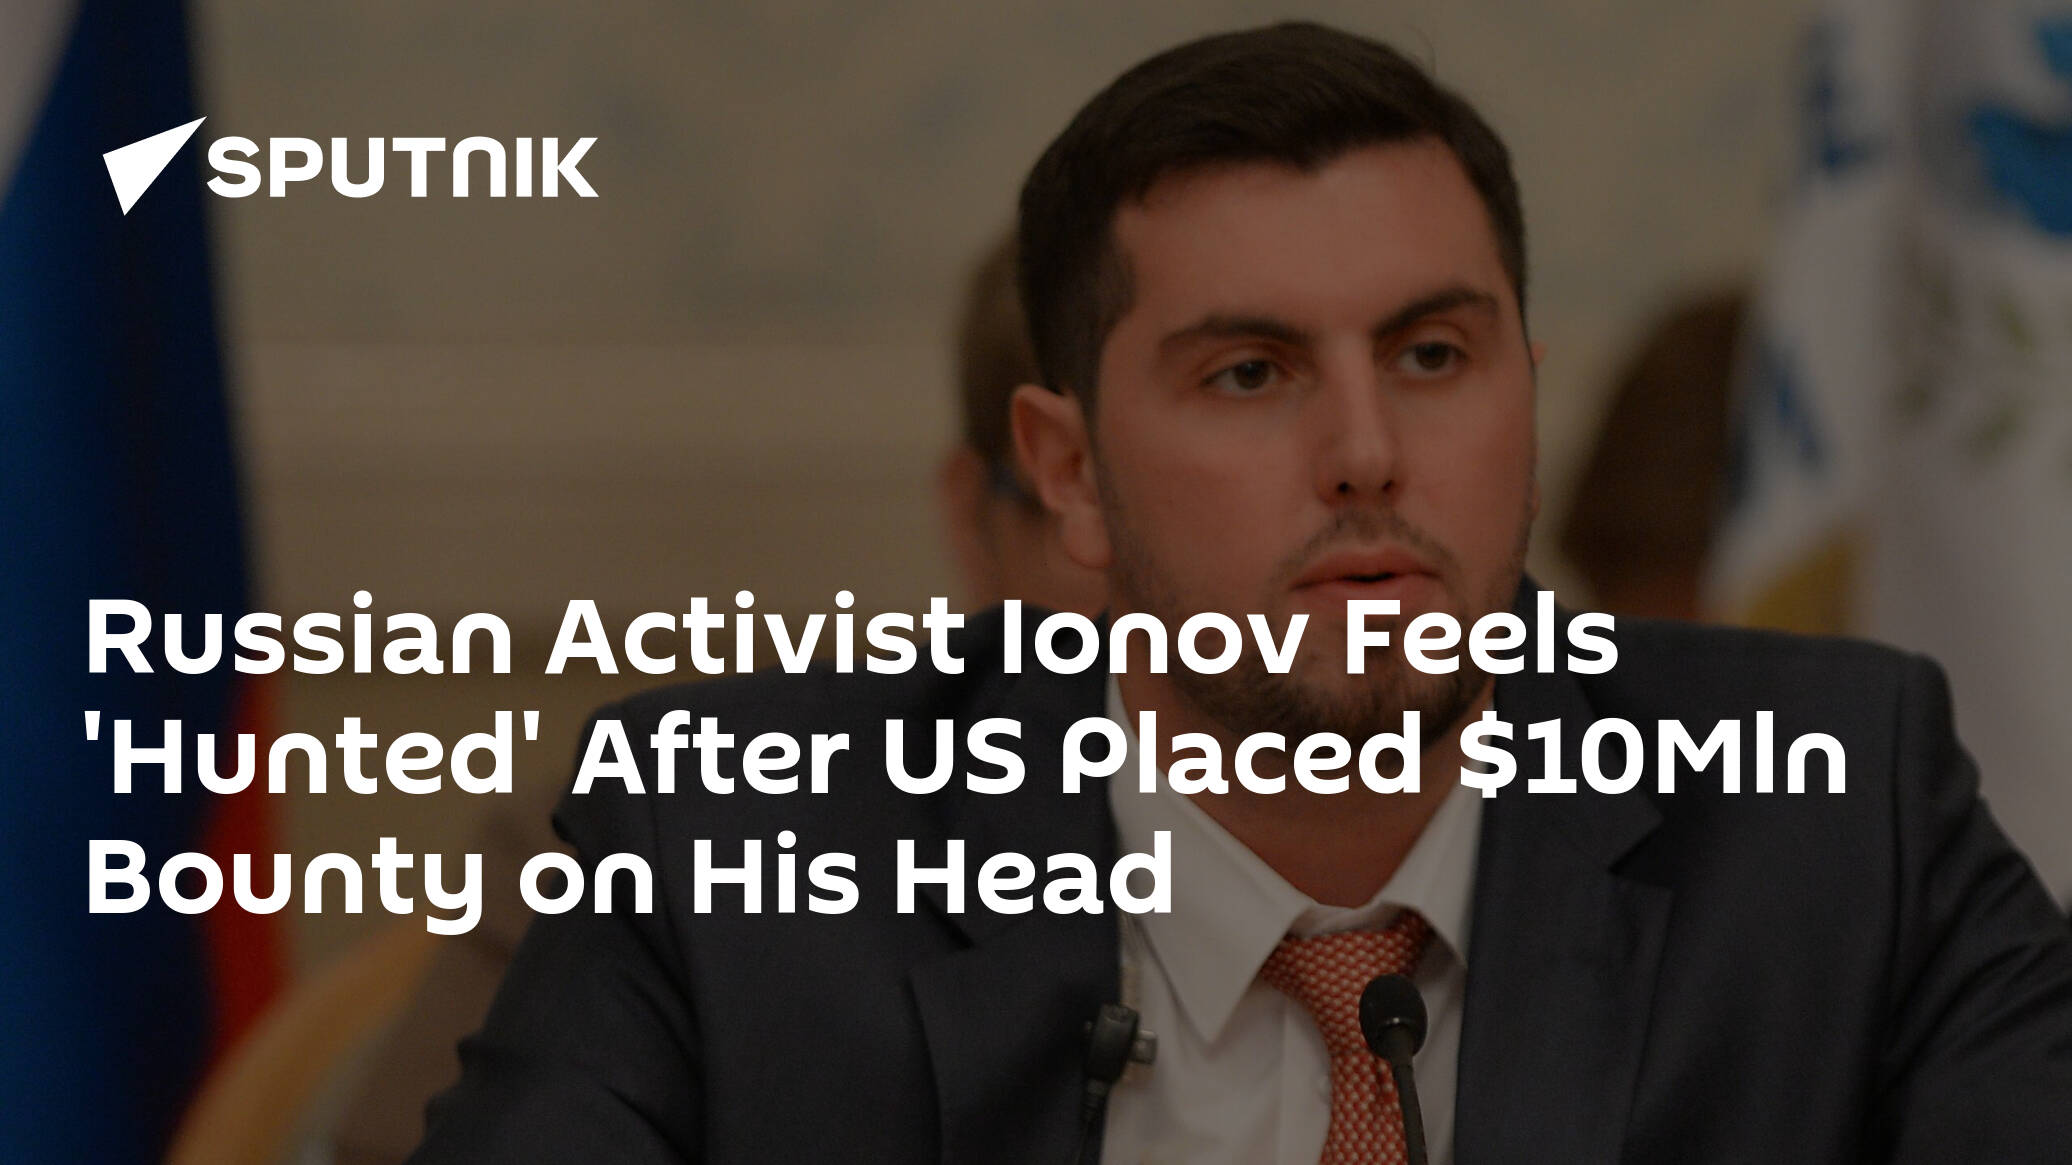 Russian Activist Ionov Feels 'Hunted' After US Placed Mln Bounty on His Head